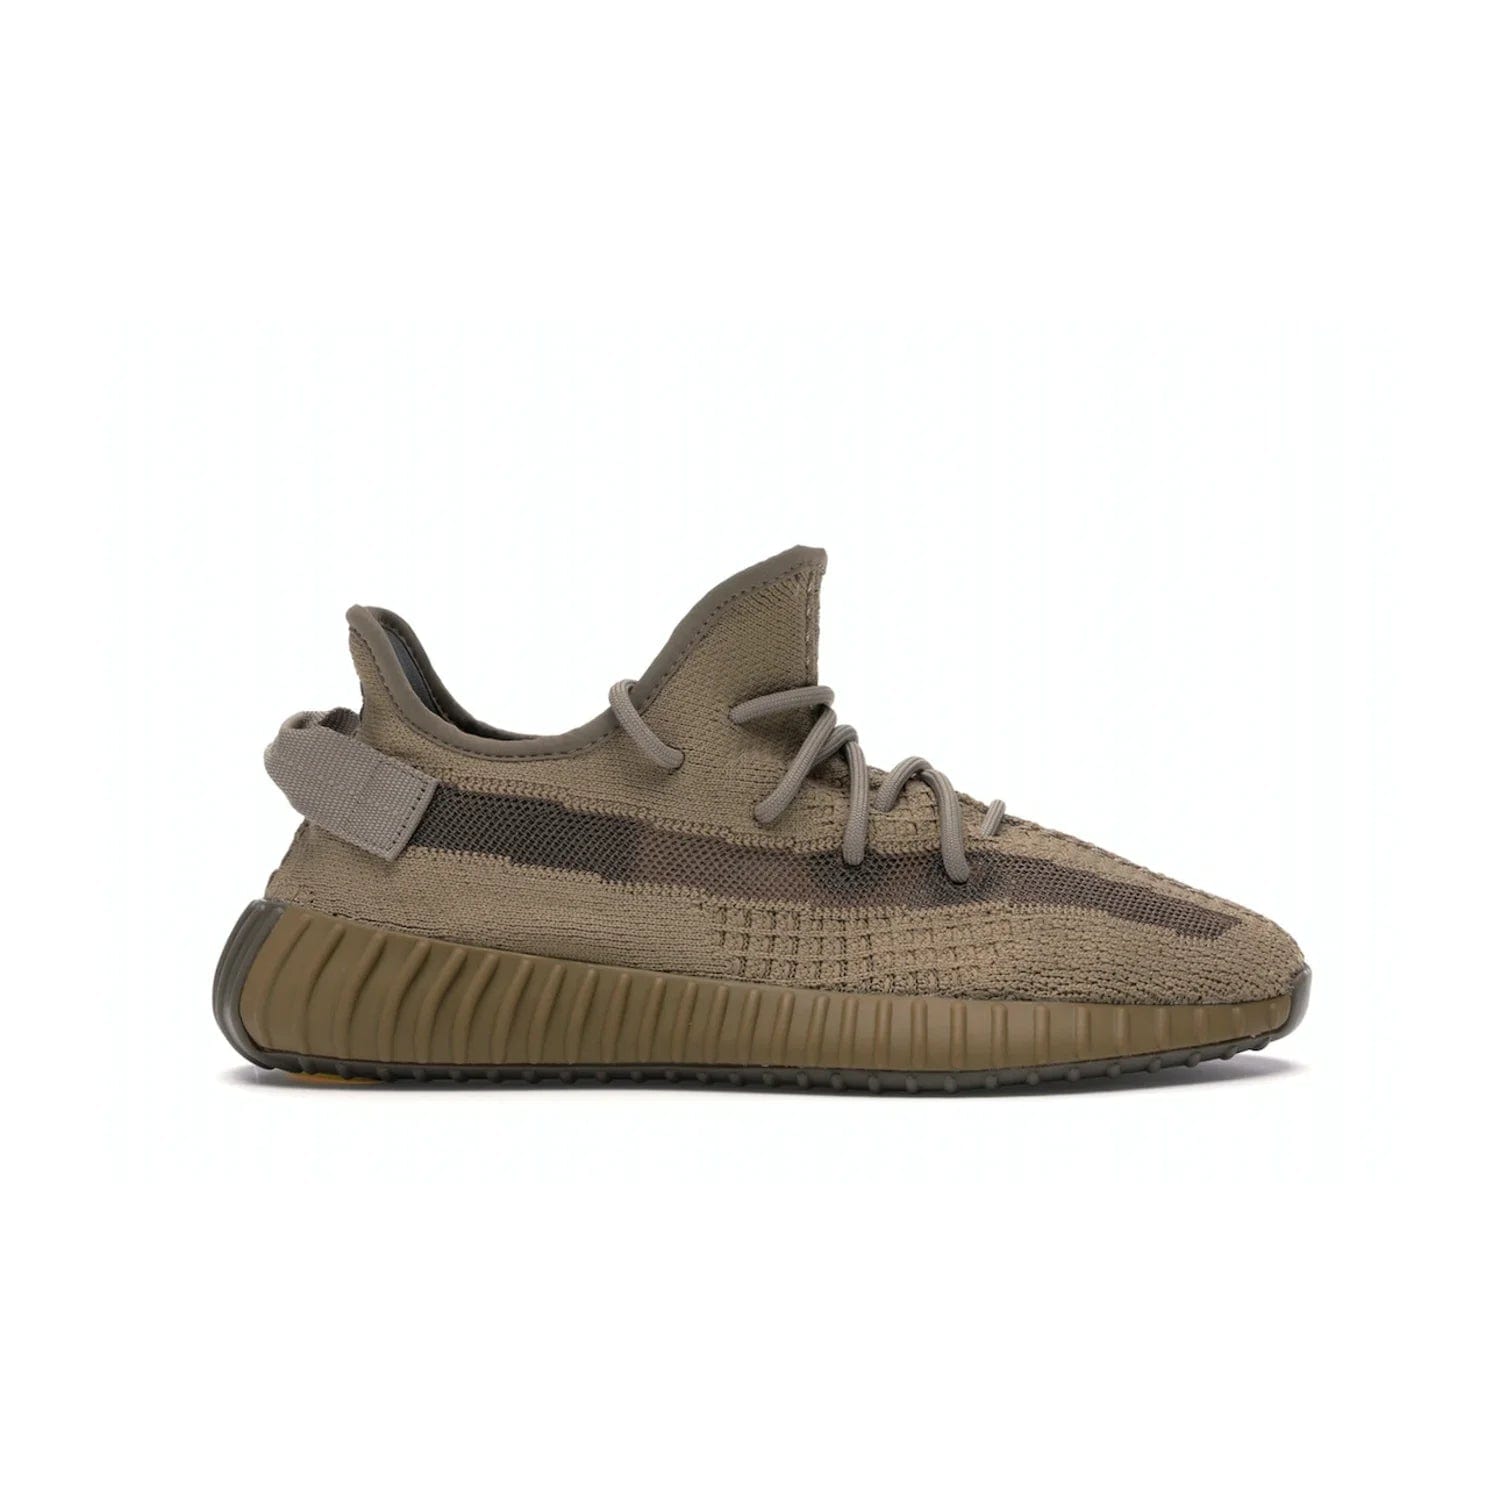 adidas Yeezy Boost 350 V2 Earth - Image 1 - Only at www.BallersClubKickz.com - Abstract style with the adidas Yeezy Boost 350 V2 Earth. Crafted with mud Primeknit upper, mud Boost and interior, and a translucent side stripe. Regional exclusive in Earth/Earth/Earth colorway, these fashionable sneakers released in February 2020. Showcase your style with the Yeezy 350 V2 Earth.